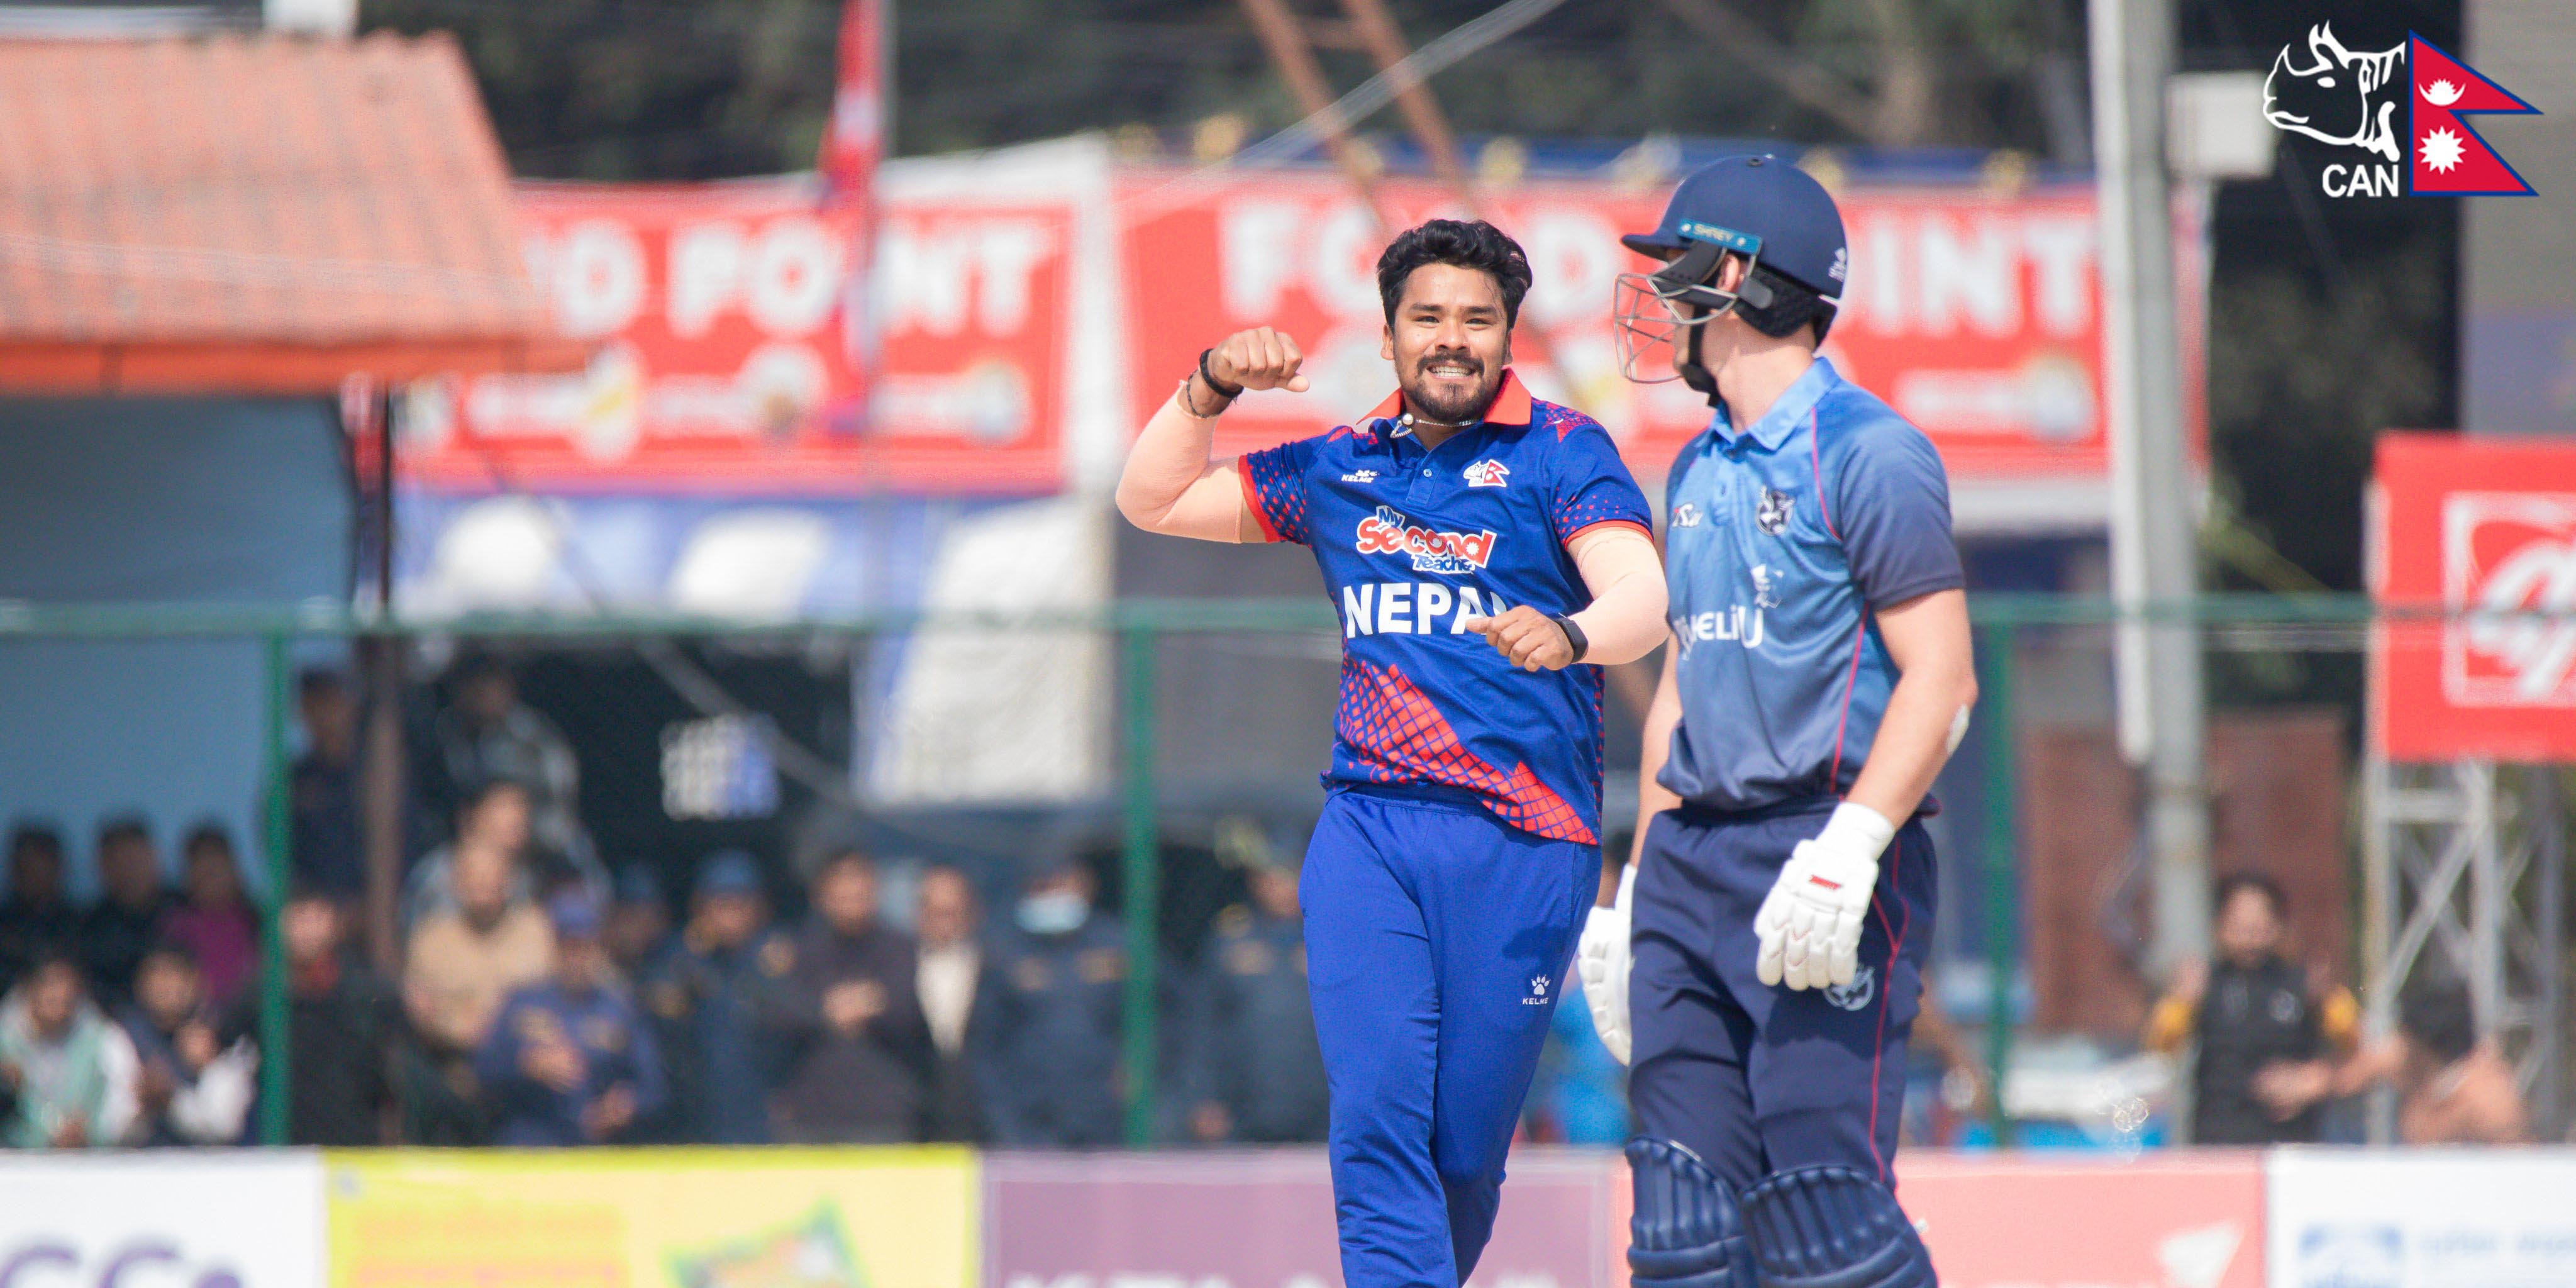 Nepal defeats Namibia by 3 runs to keep its final hopes alive